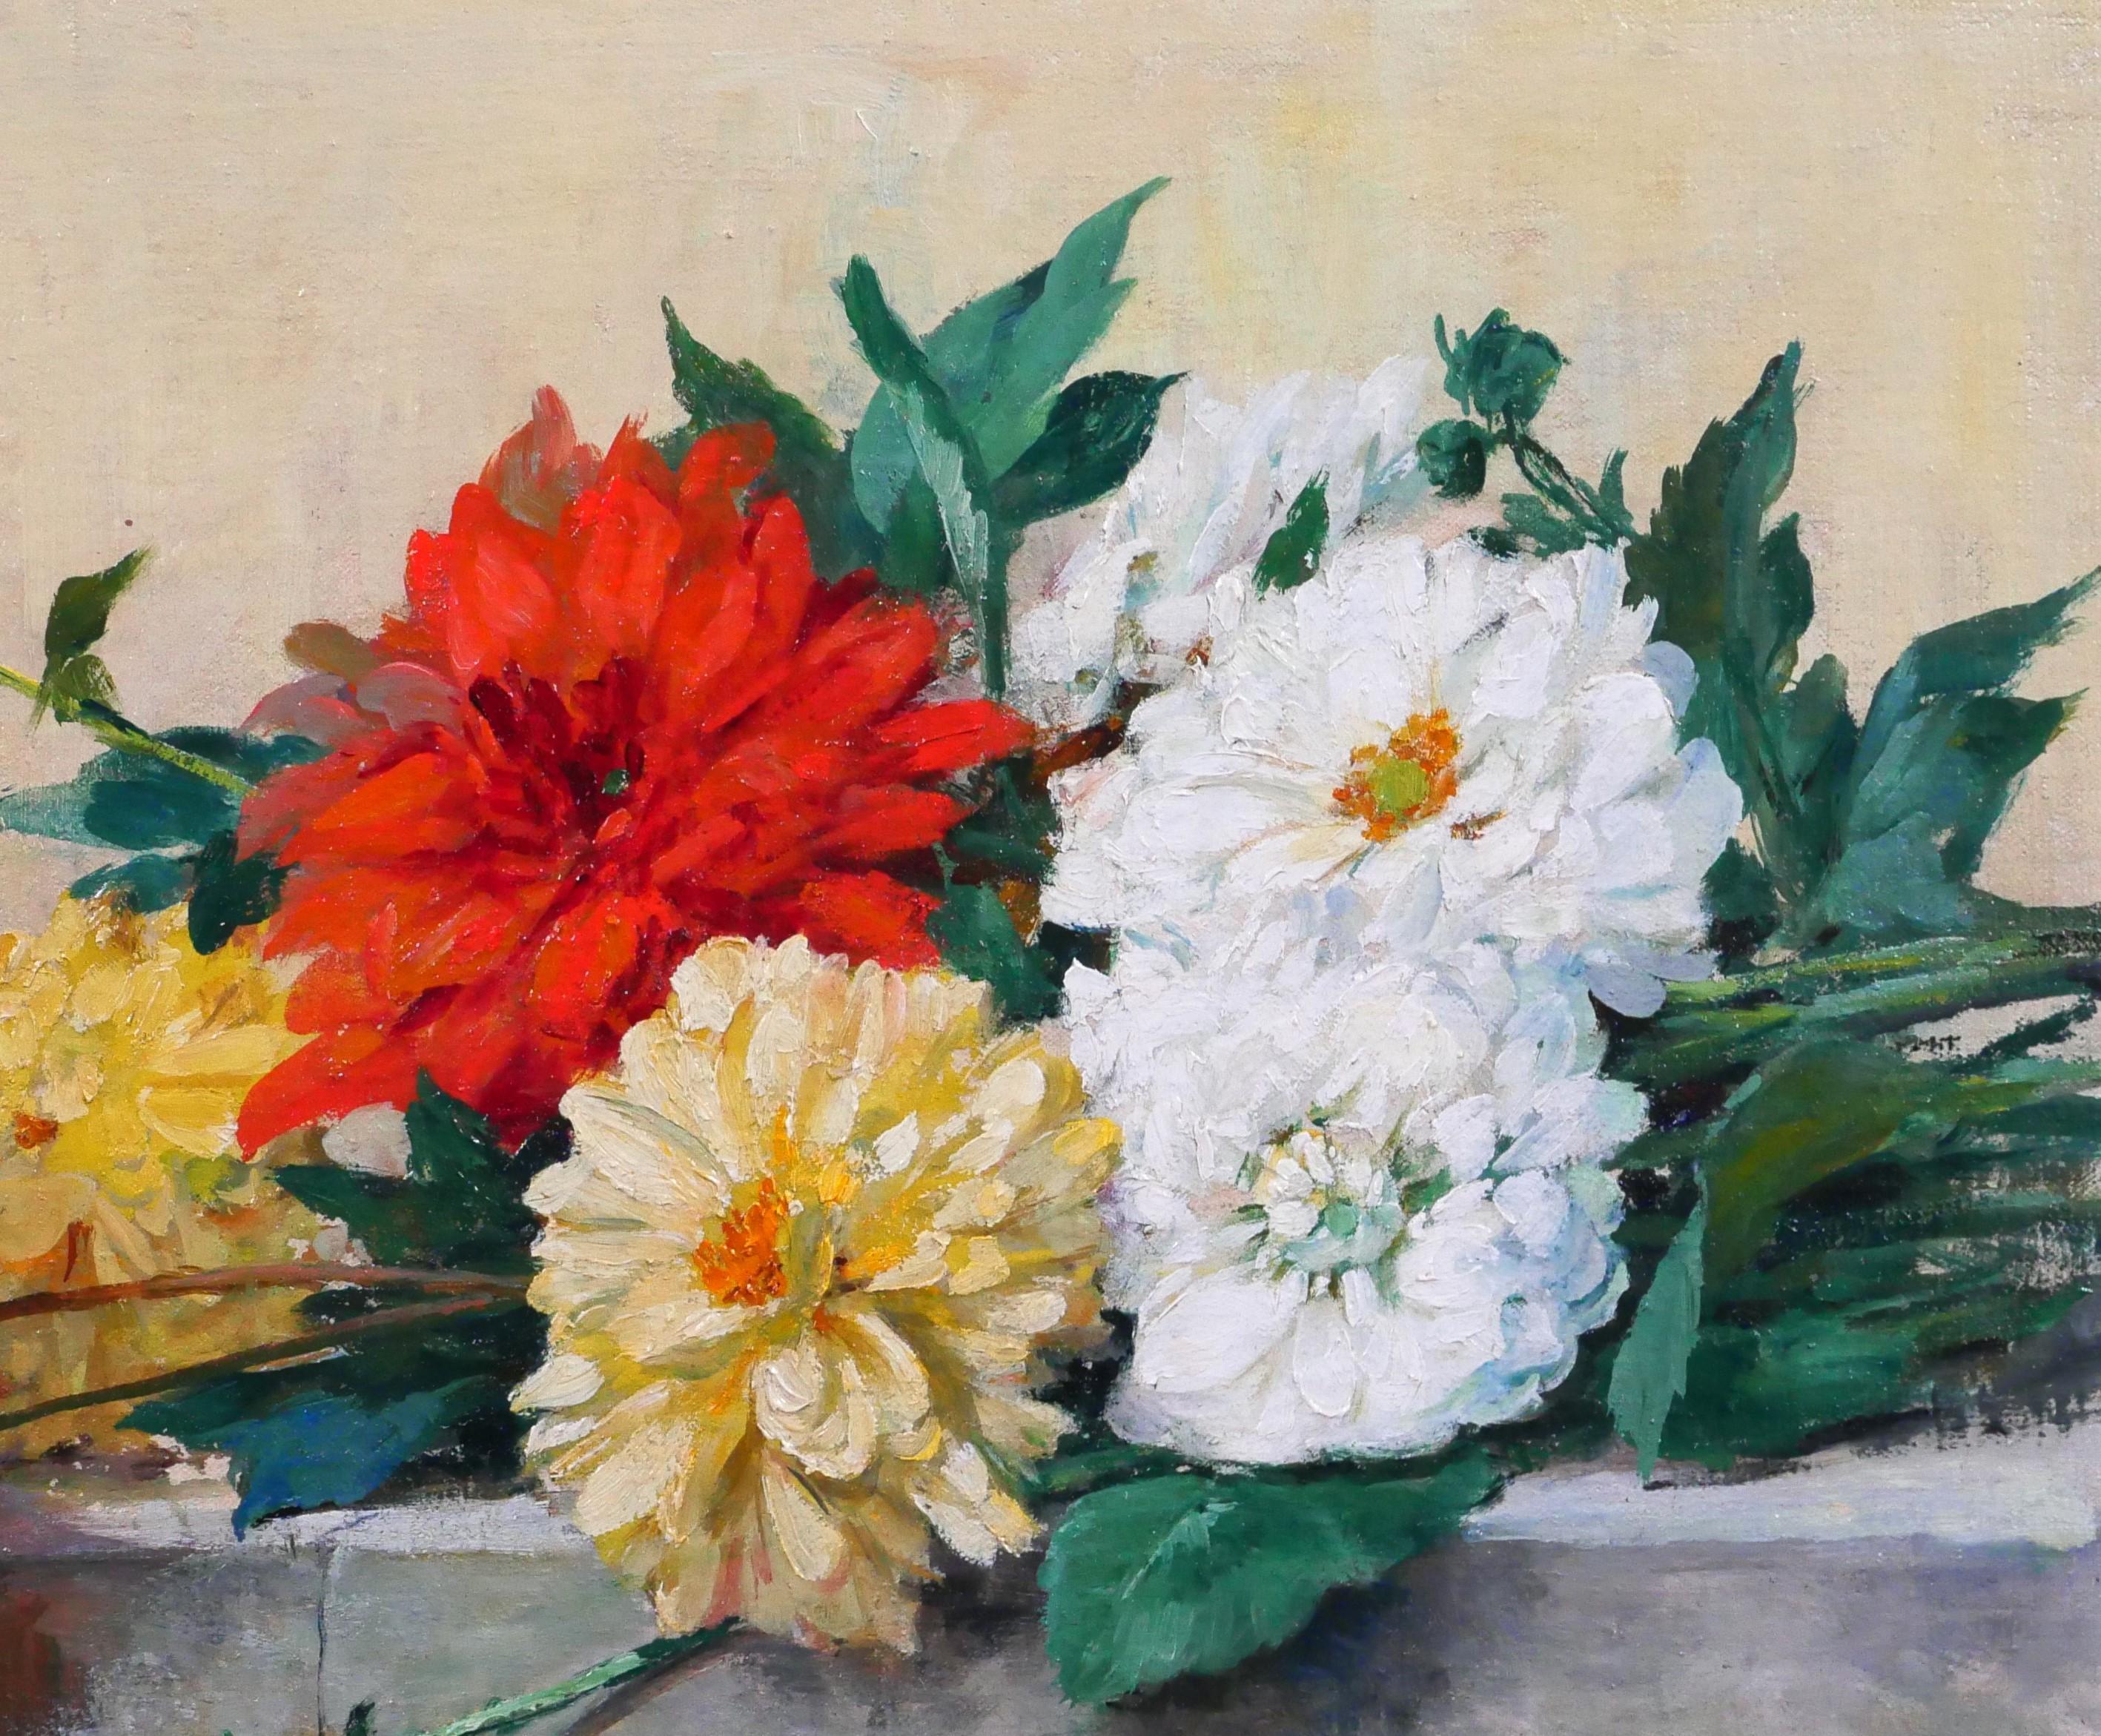 Lucien Gilbert DARPY
1875-1964
Bouquet of summer flowers
Painting, oil on canvas glued to a wooden panel
Signed
Painting: 51.5 x 35.5 cm
Modern natural oak frame (American box): 61 x 44.5 cm
Very good condition
Circa 1920-30